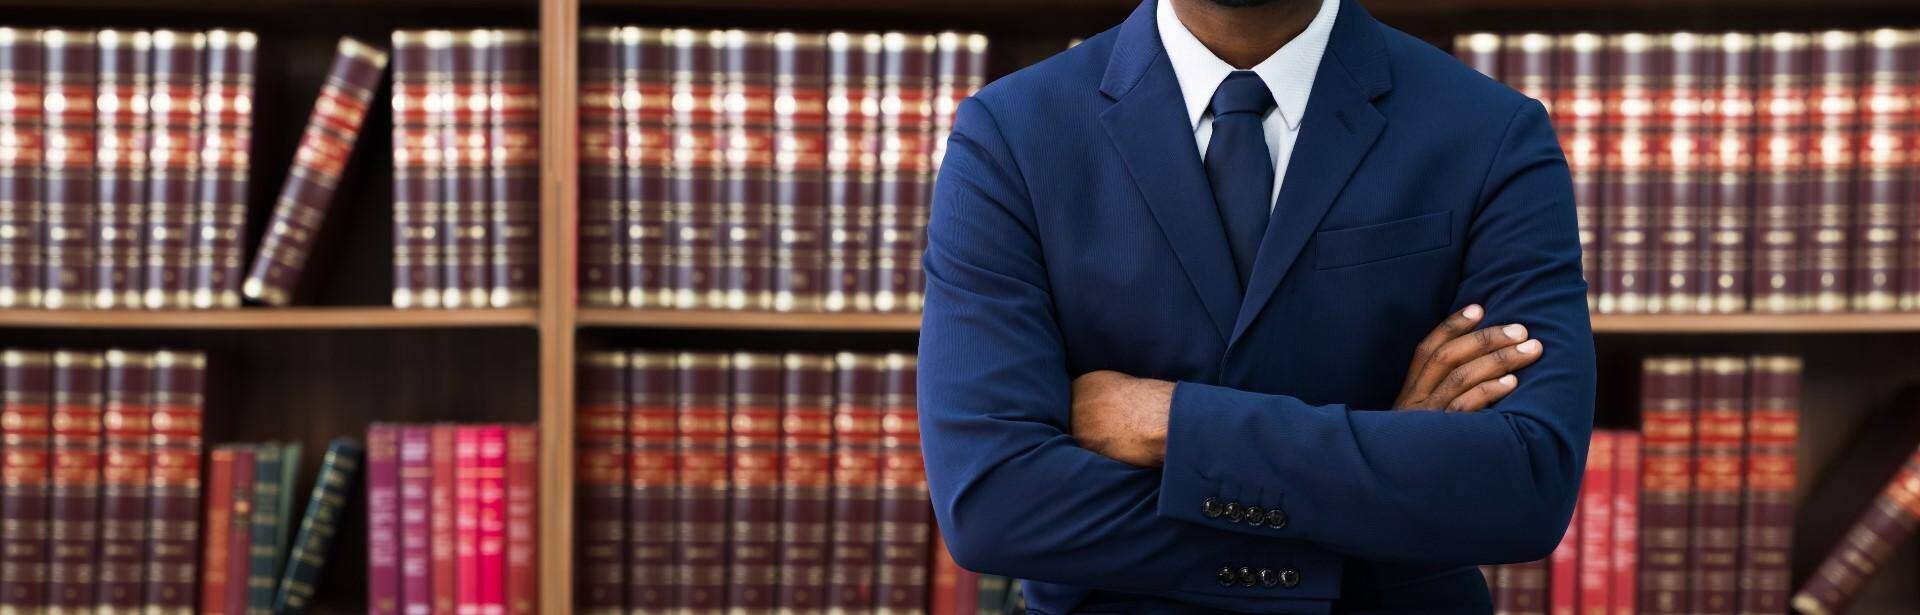 A black lawyer standing in front of a bookshelf of law book in Athens, Georgia